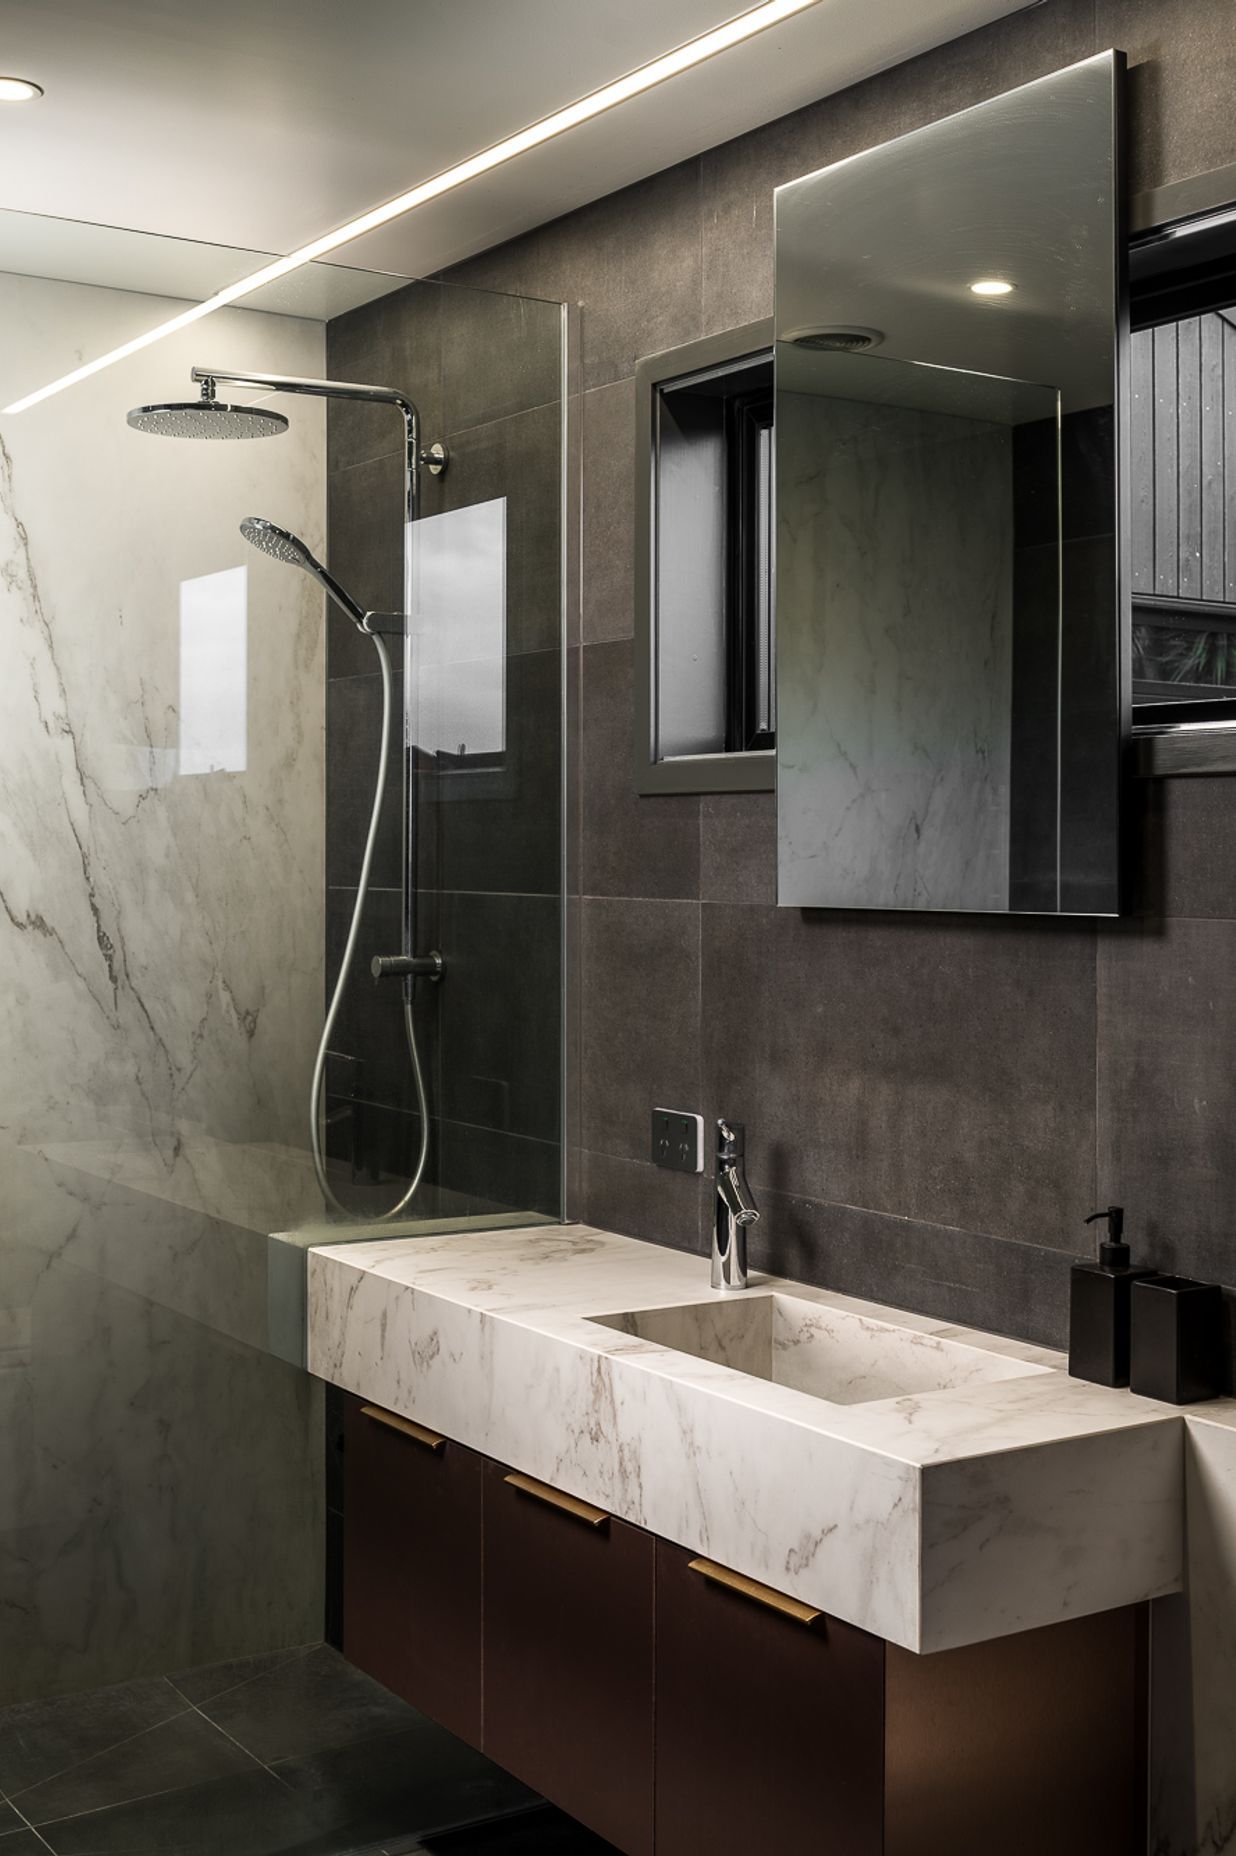 The understated yet richly textural palette continues in the bathroom with its mix of stone and timber.